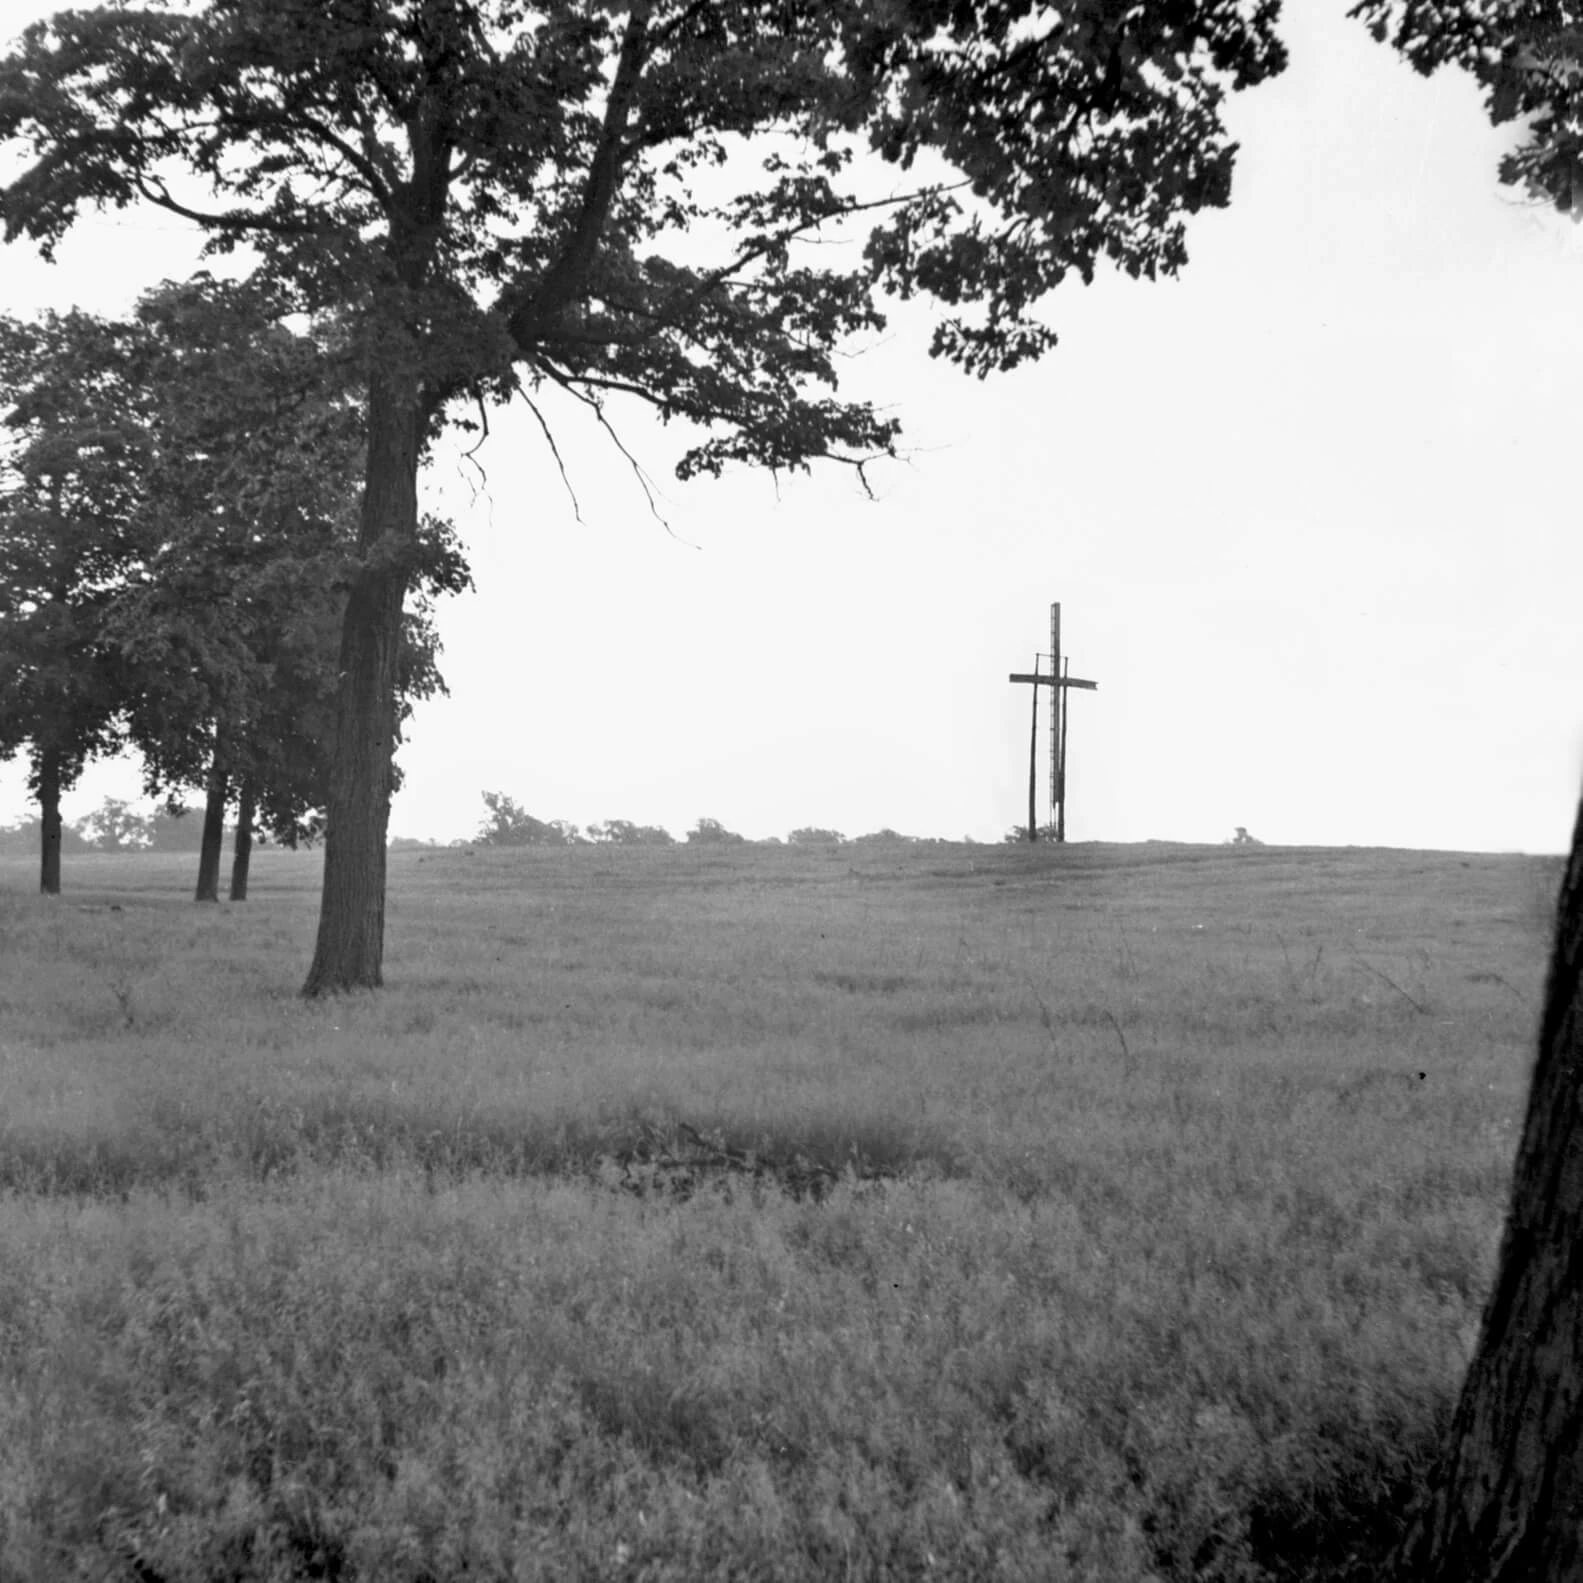 Large grassy field and trees are in the foreground, and in the distance there is a large wooden cross stands, held up by supports